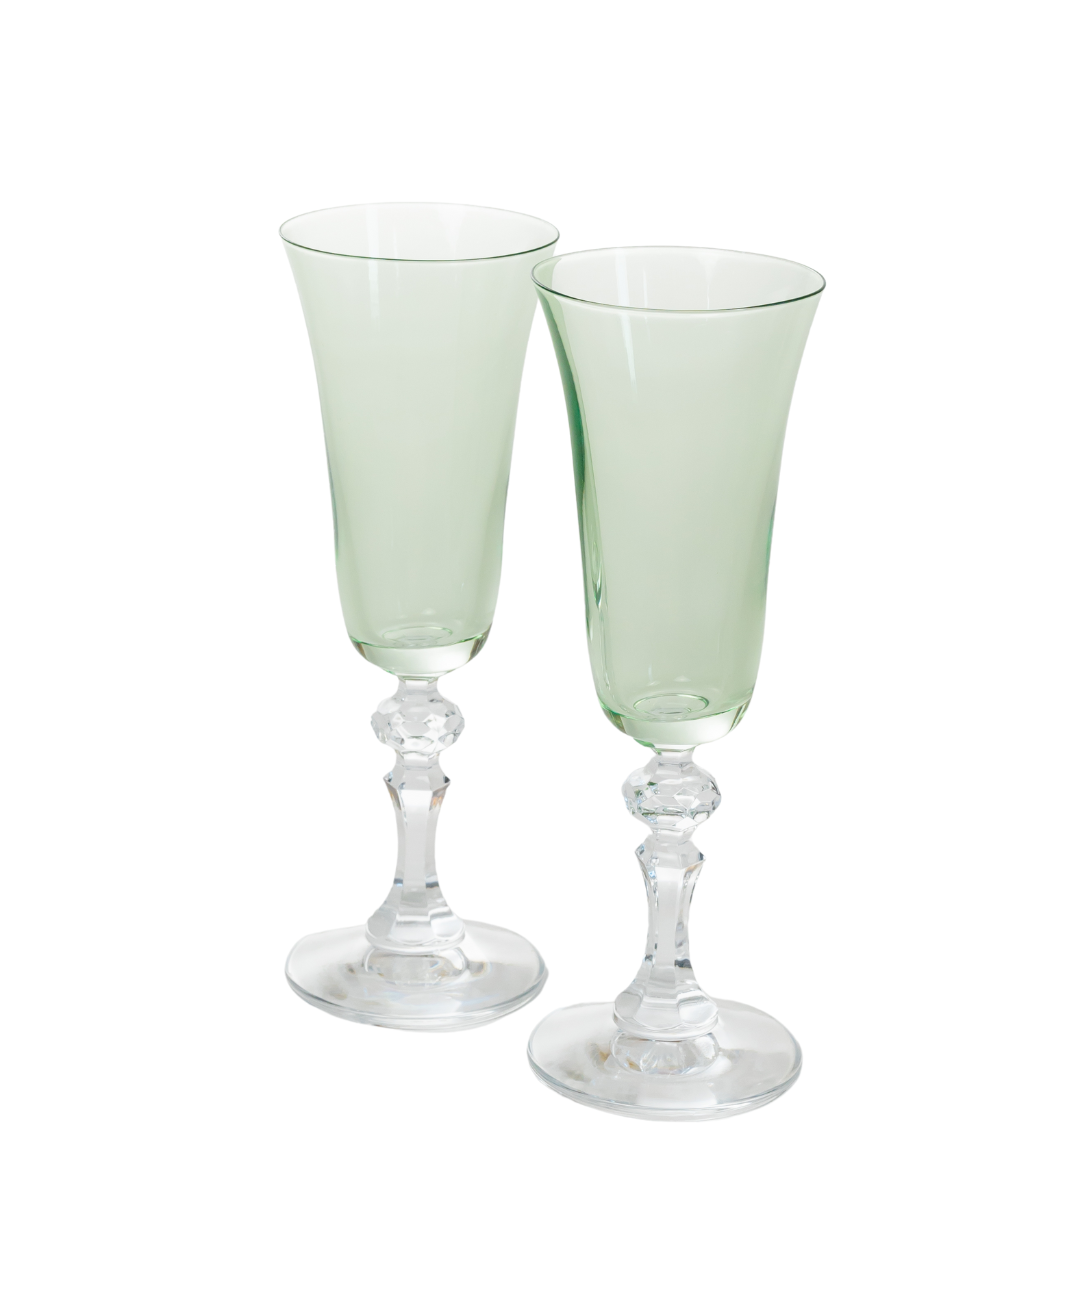 Estelle Colored Regal Flute With Clear Stem - Set of 2 {Mint Green}